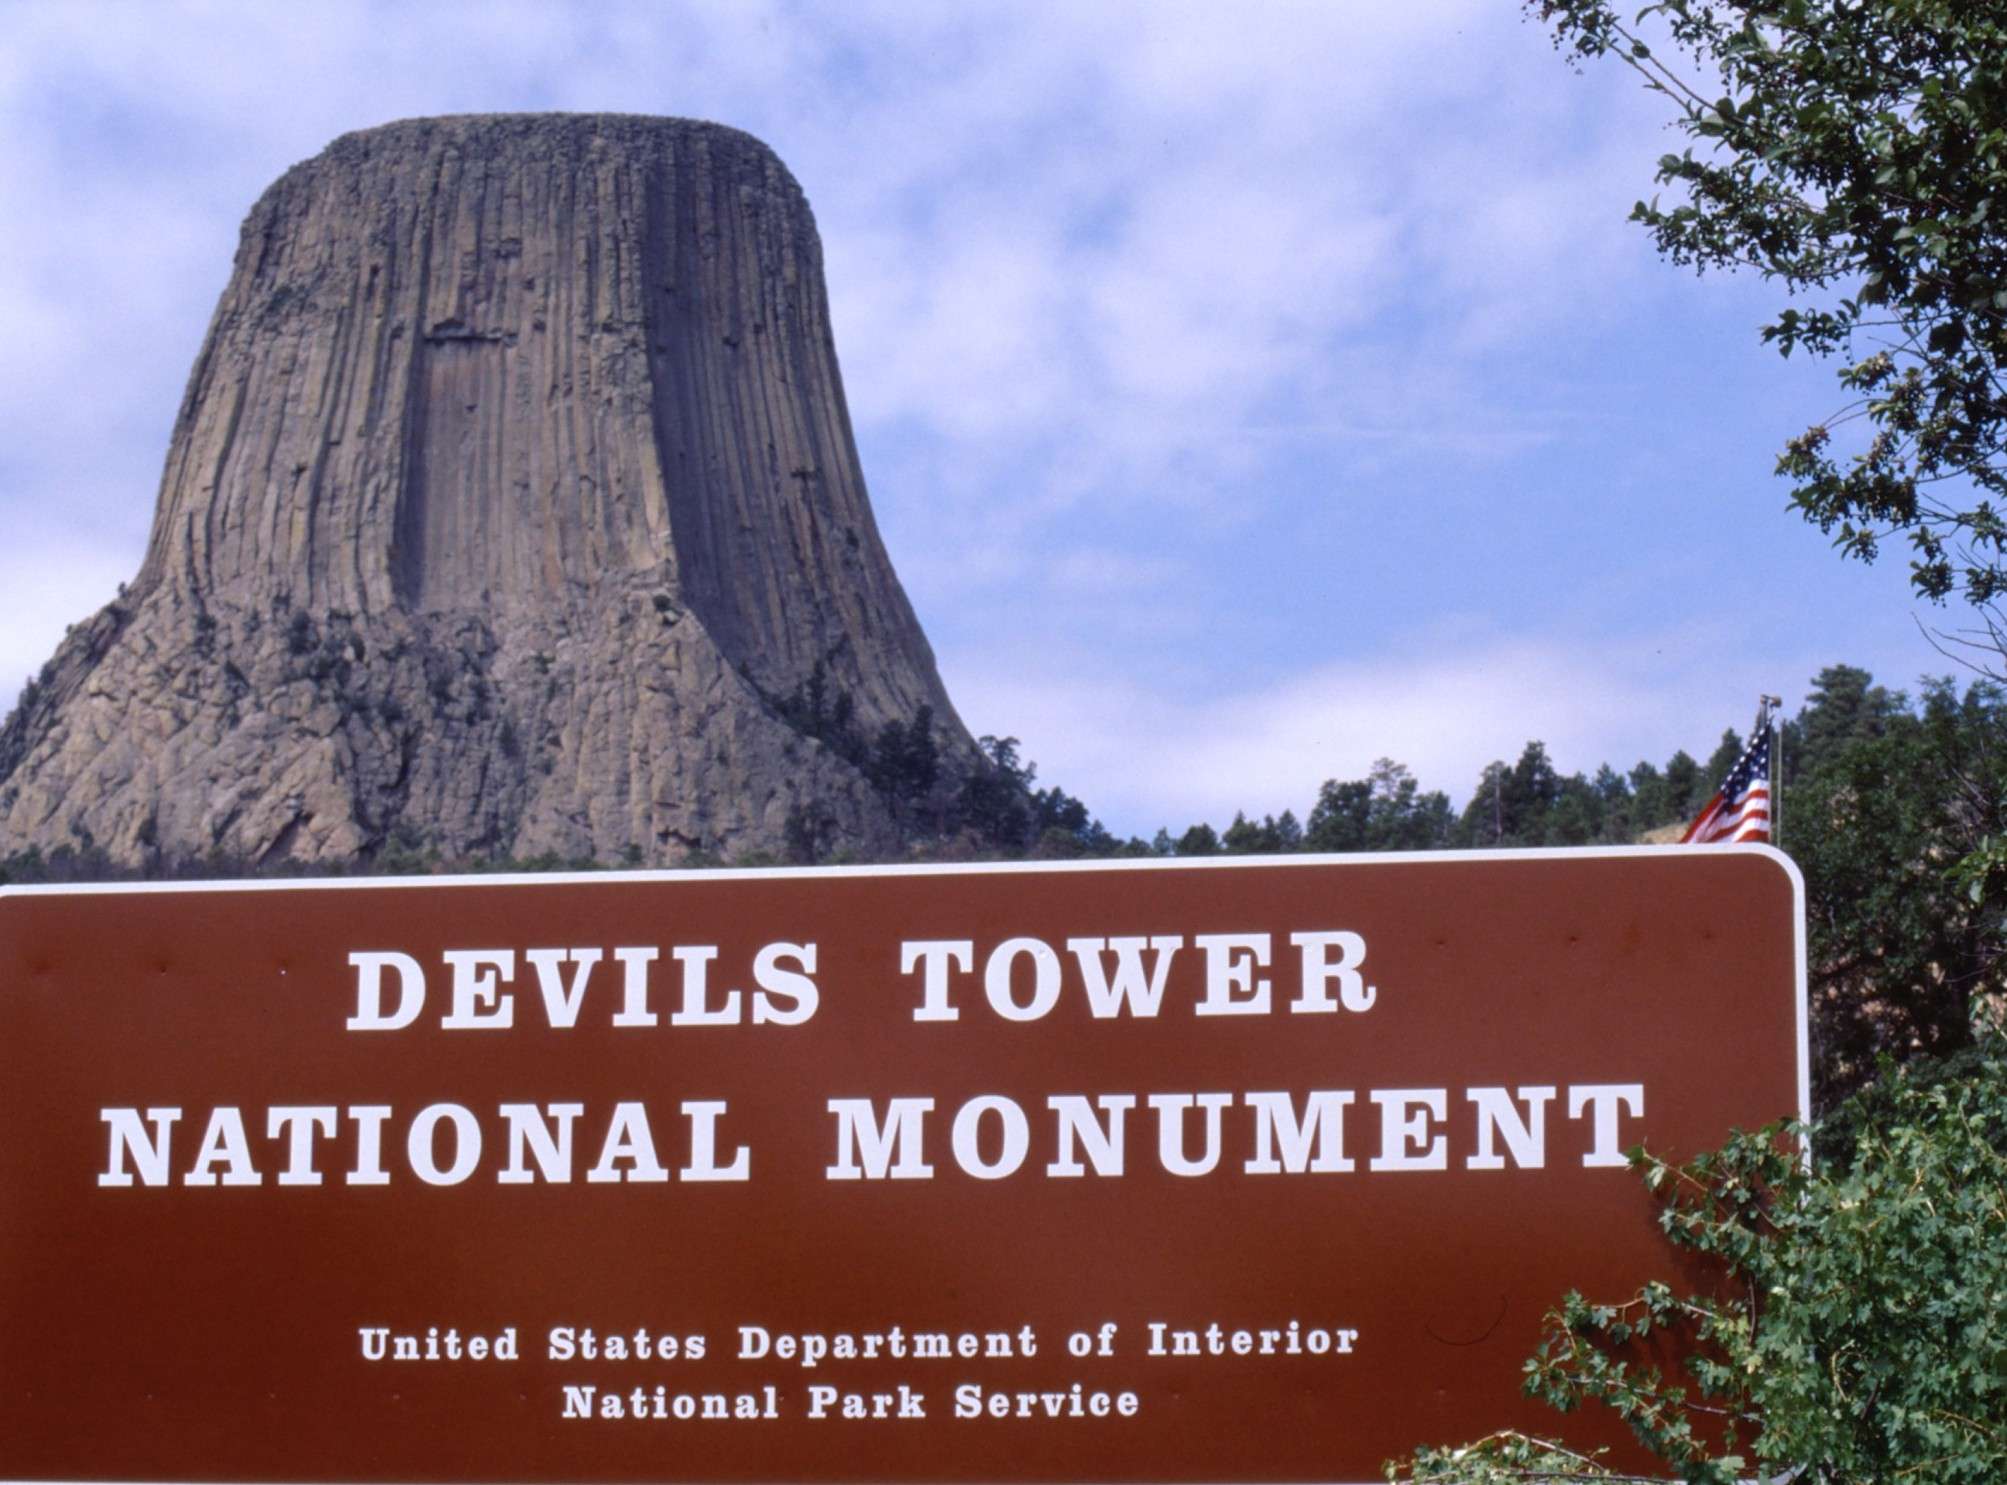 Devils Tower: 224 KB; click on the image to enlarge